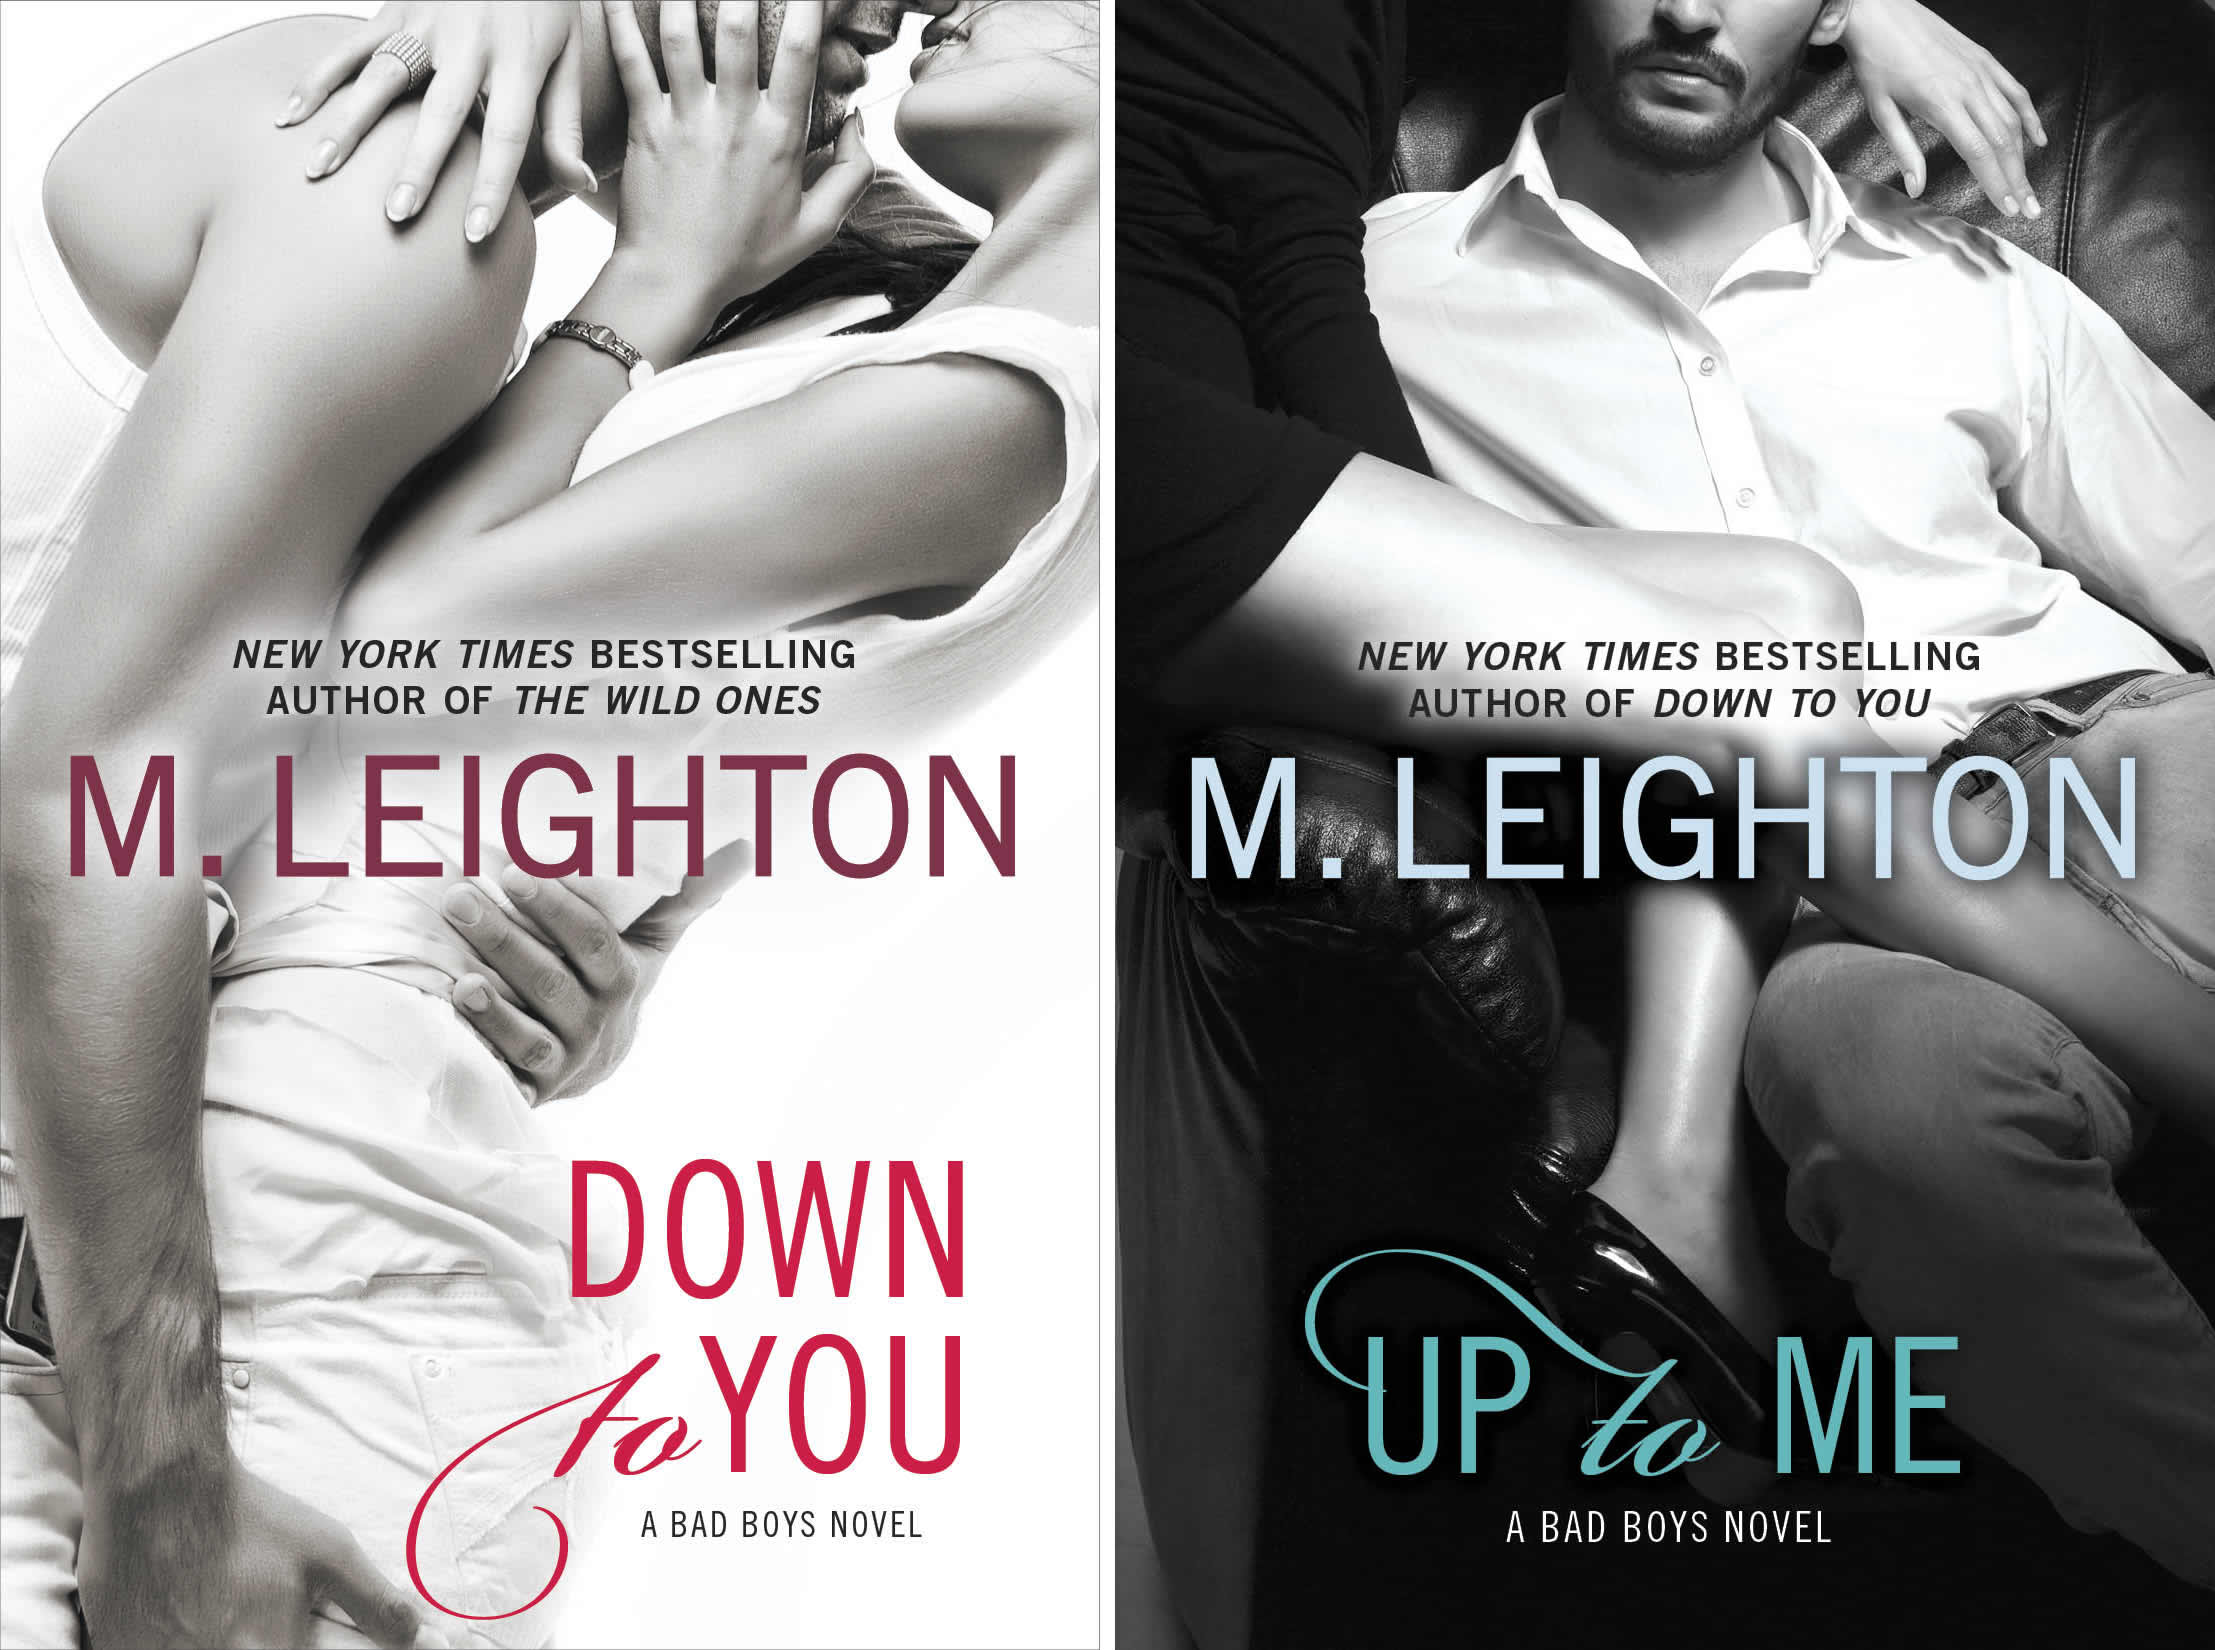 BAD BOYS NEW COVERS & TEASER from M. LEIGHTON